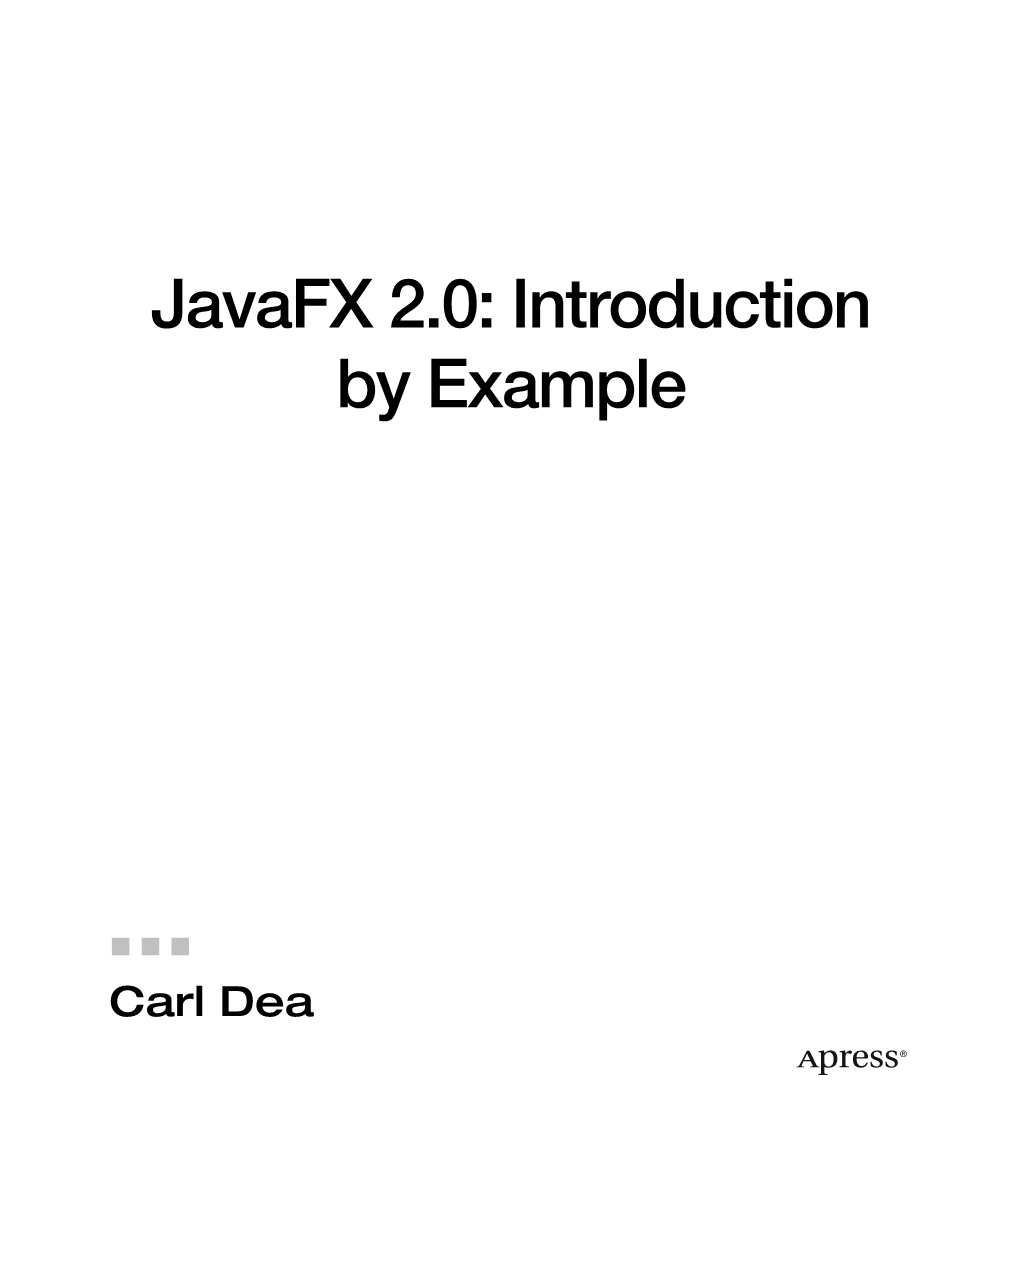 Javafx 2.0: Introduction by Example